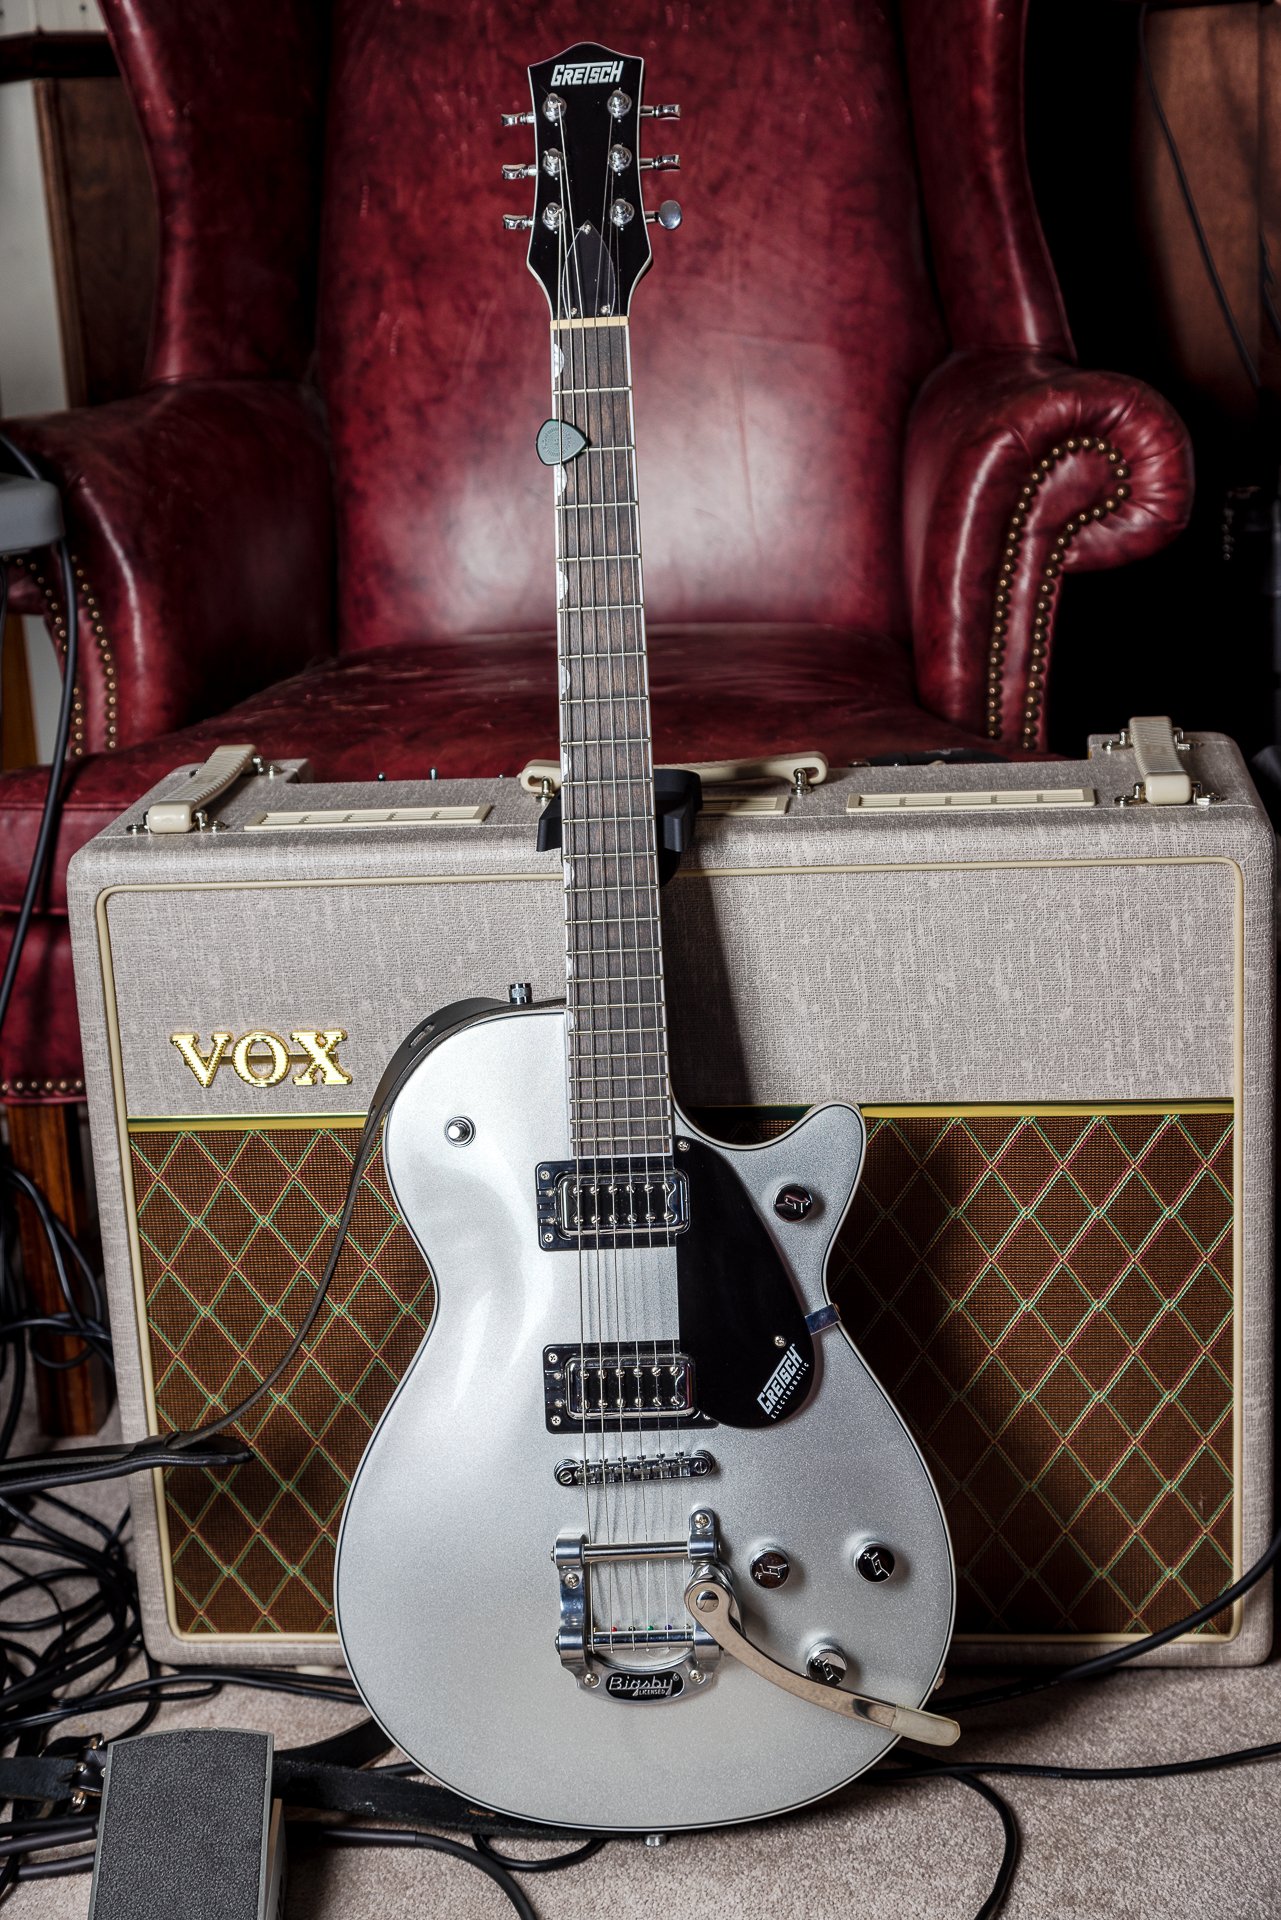 Review : A Used Find - Gretsch Electromatic Silver Jet — That